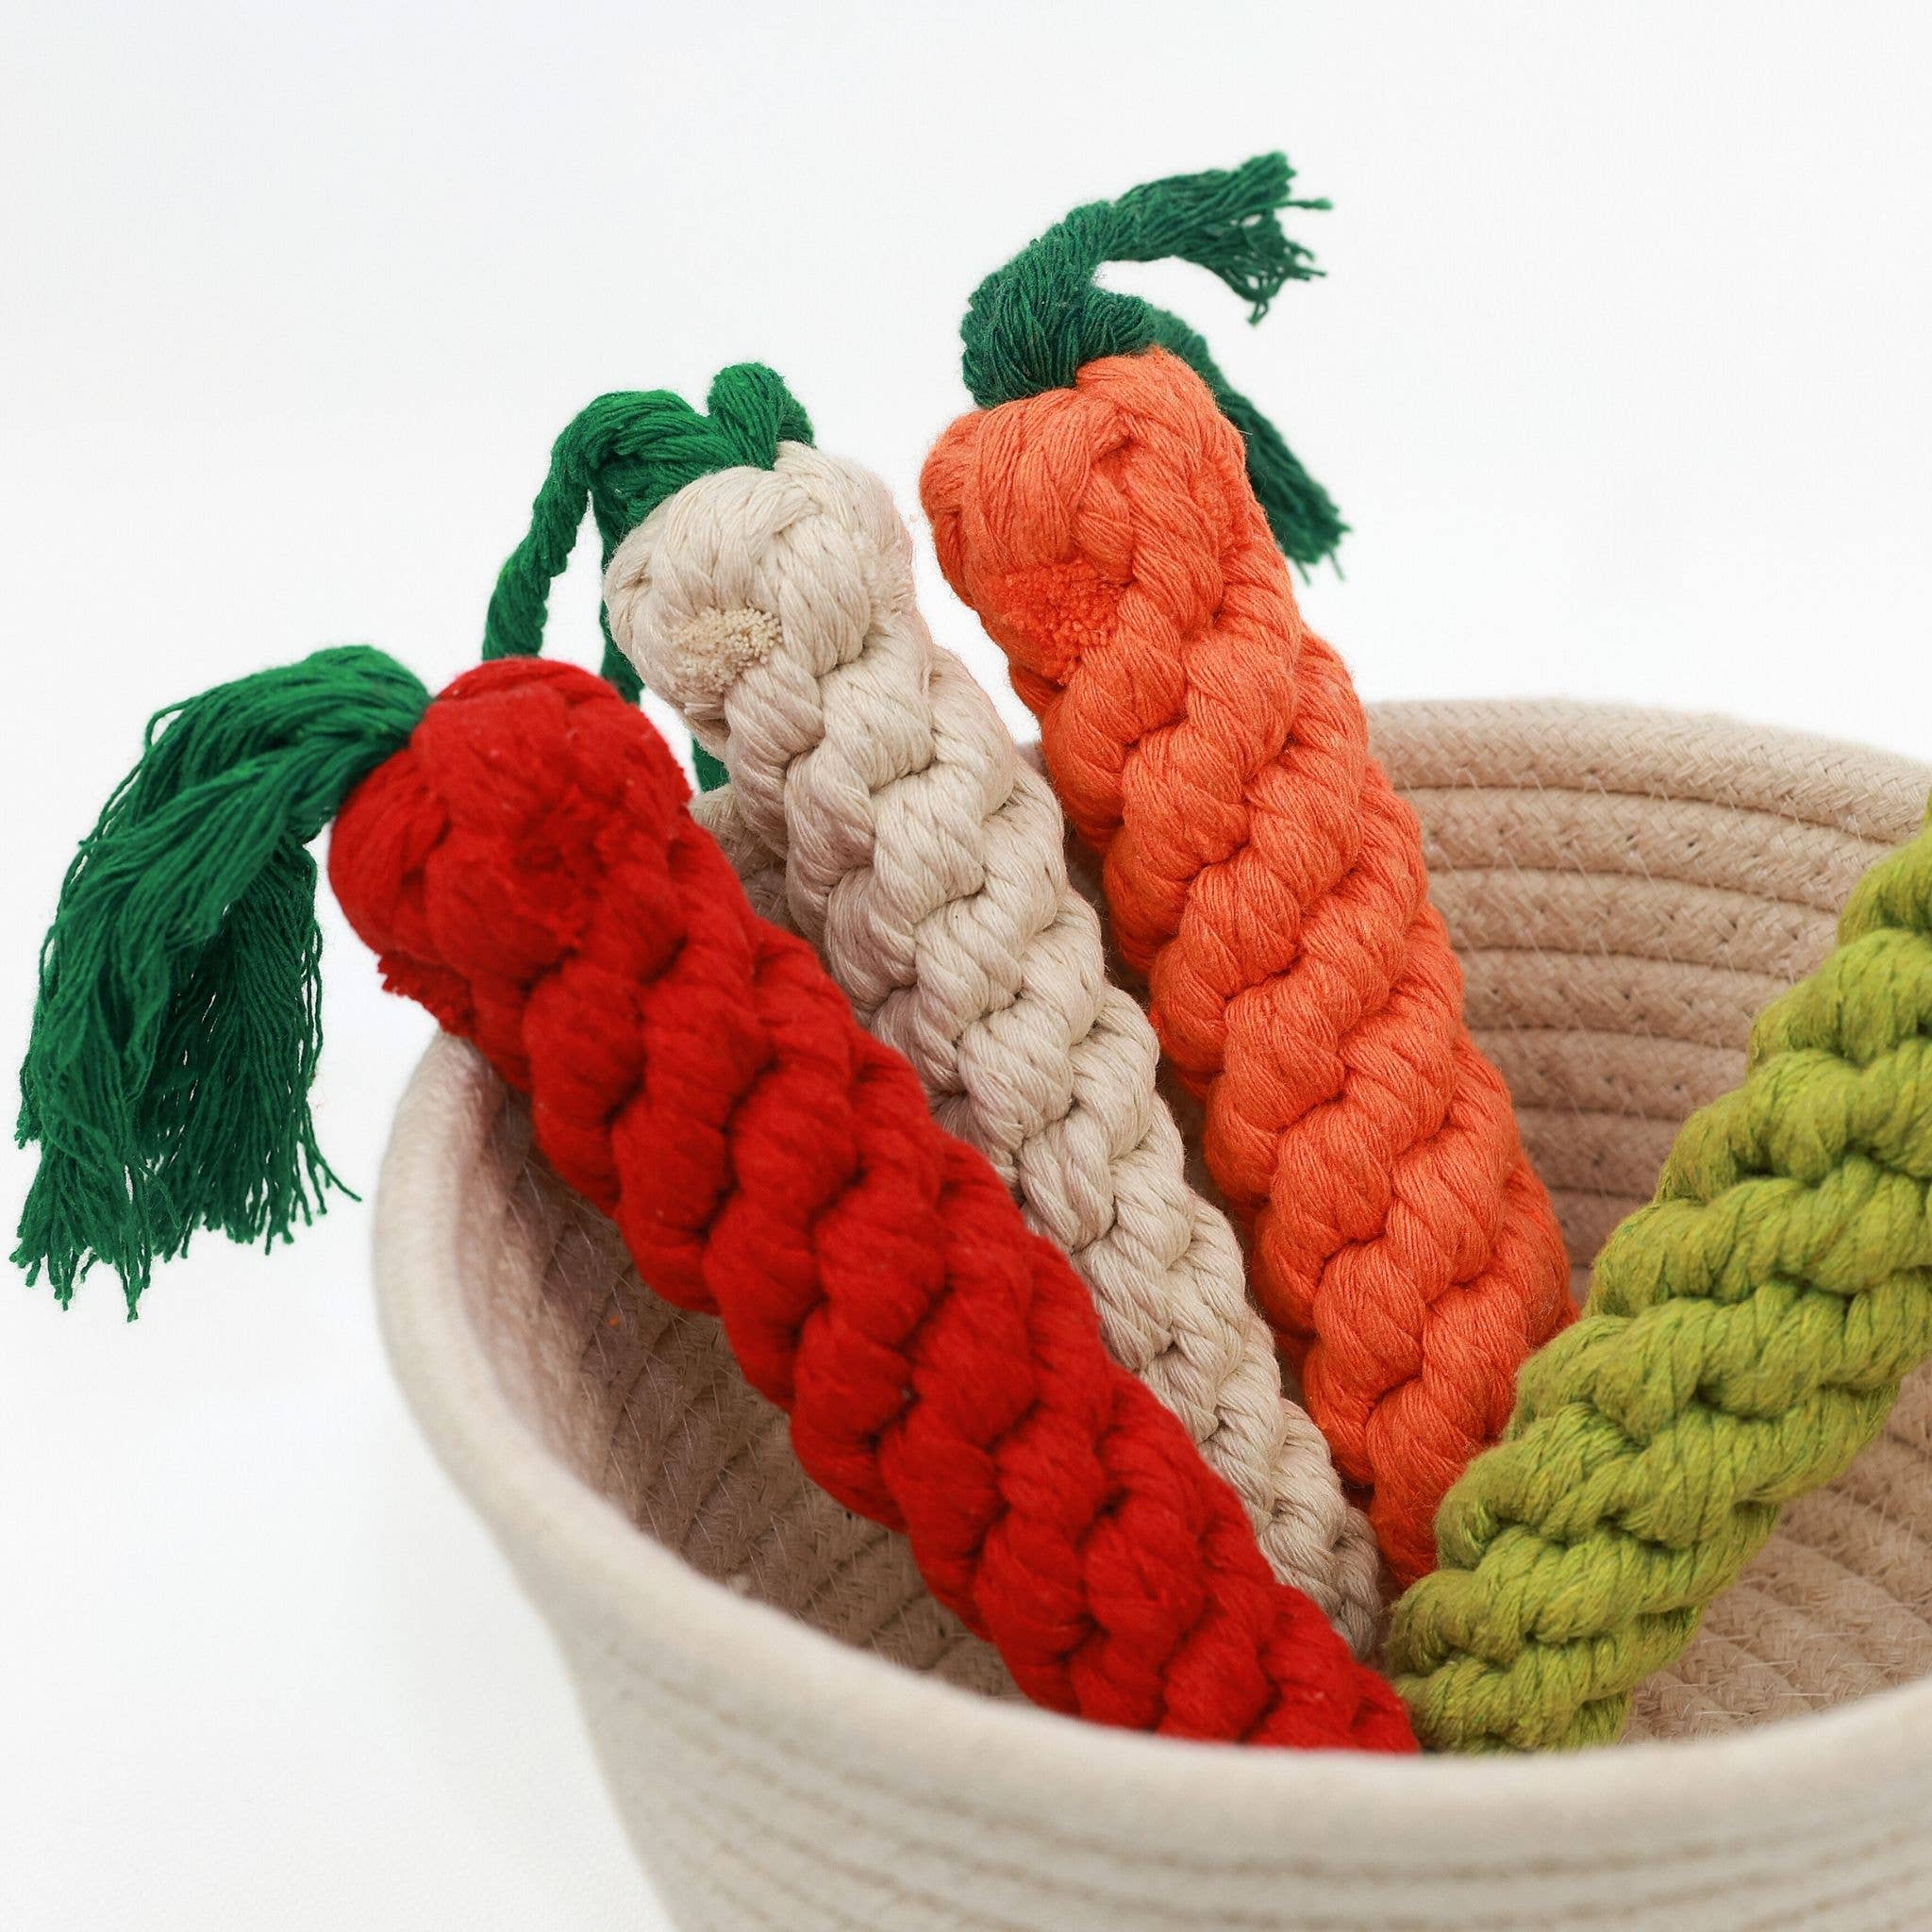 CSCORD International LLC - Handmade Sustainable Carrot Rope Chew Toys for Puppies